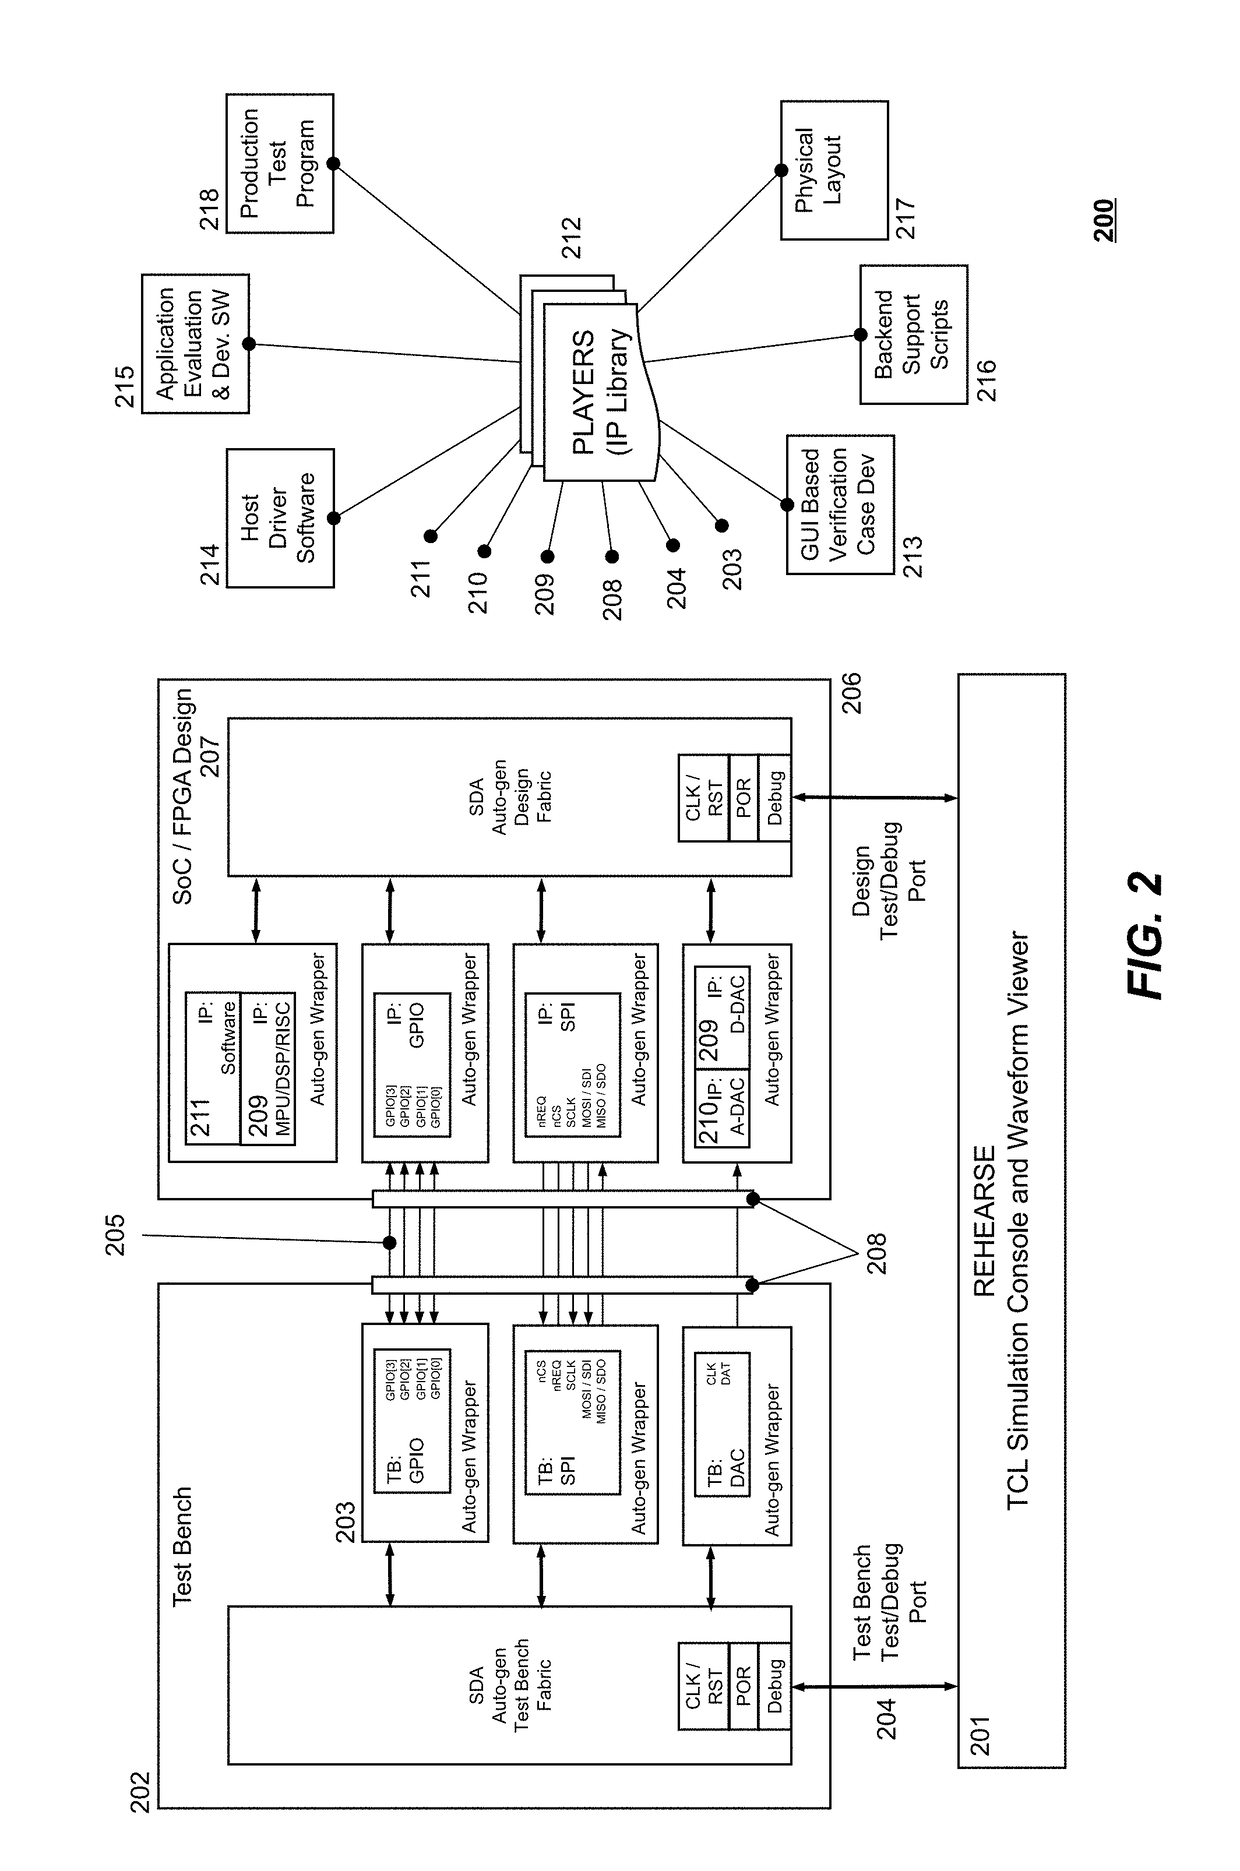 Methods and systems for system design automation (SDA) of mixed signal electronic circuitry including embedded software designs